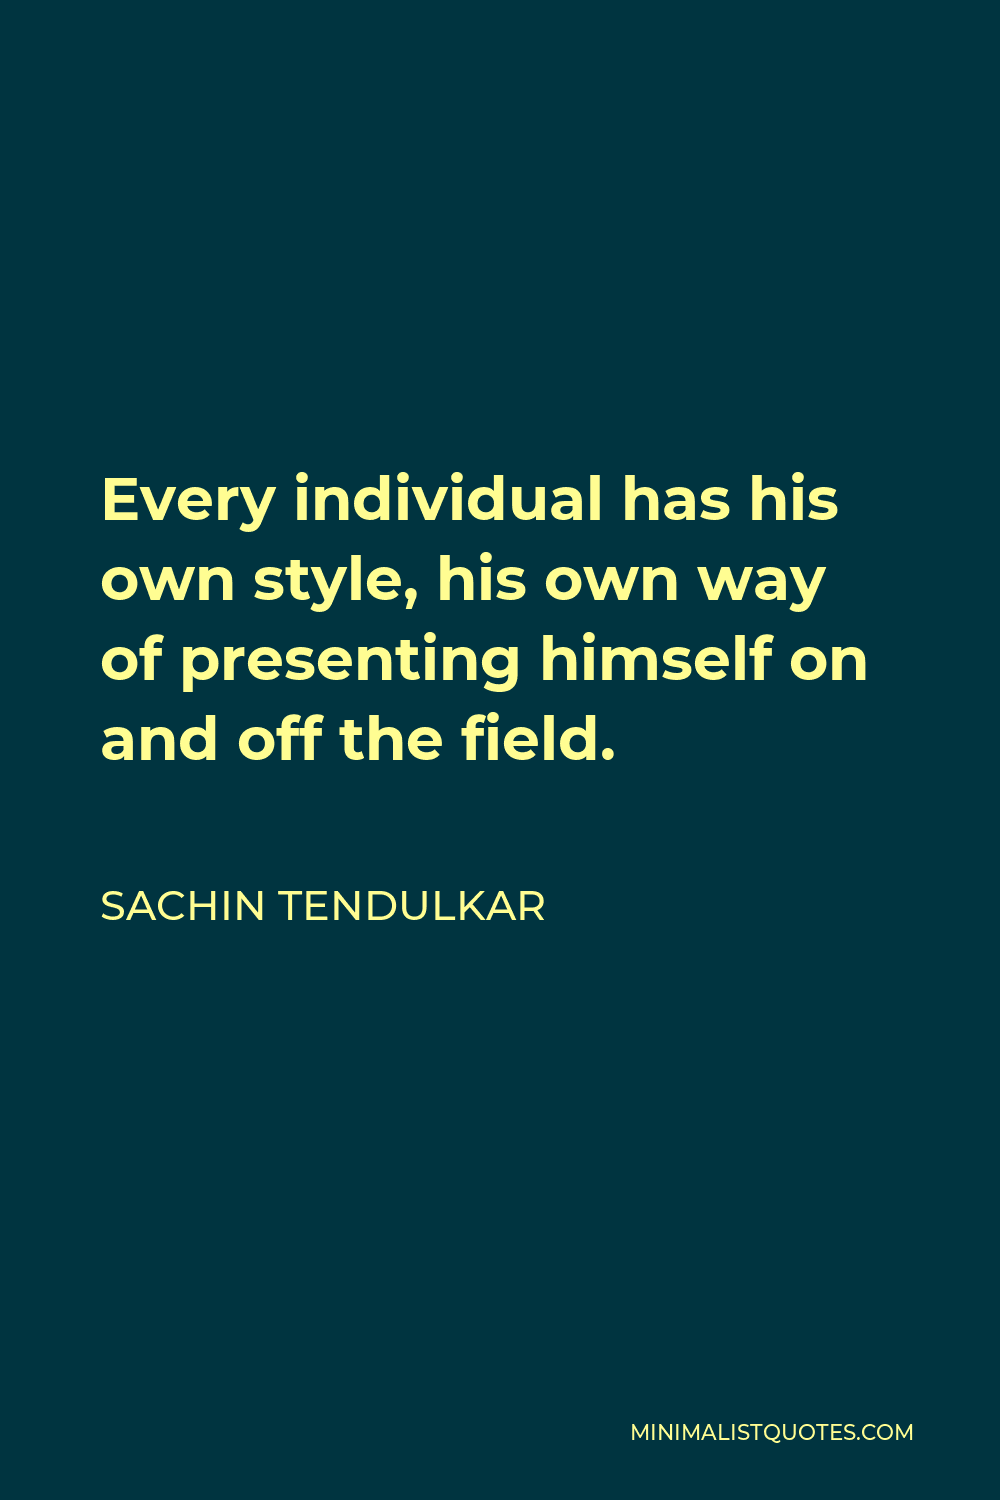 Sachin Tendulkar Quote - Every individual has his own style, his own way of presenting himself on and off the field.